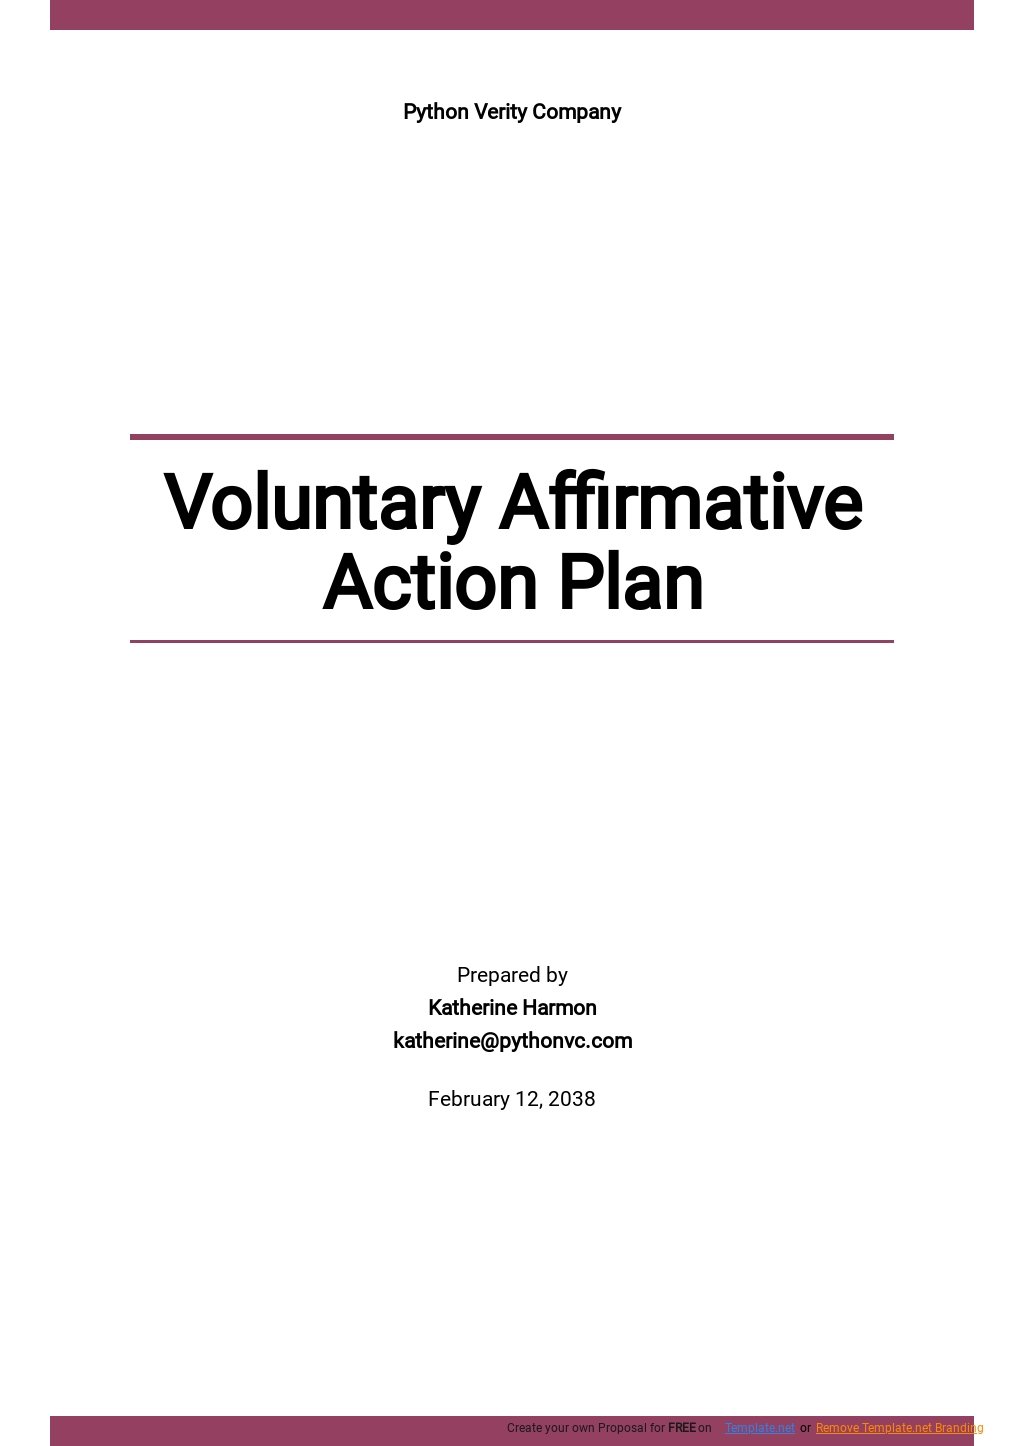 Voluntary Affirmative Action Plan Template.jpe